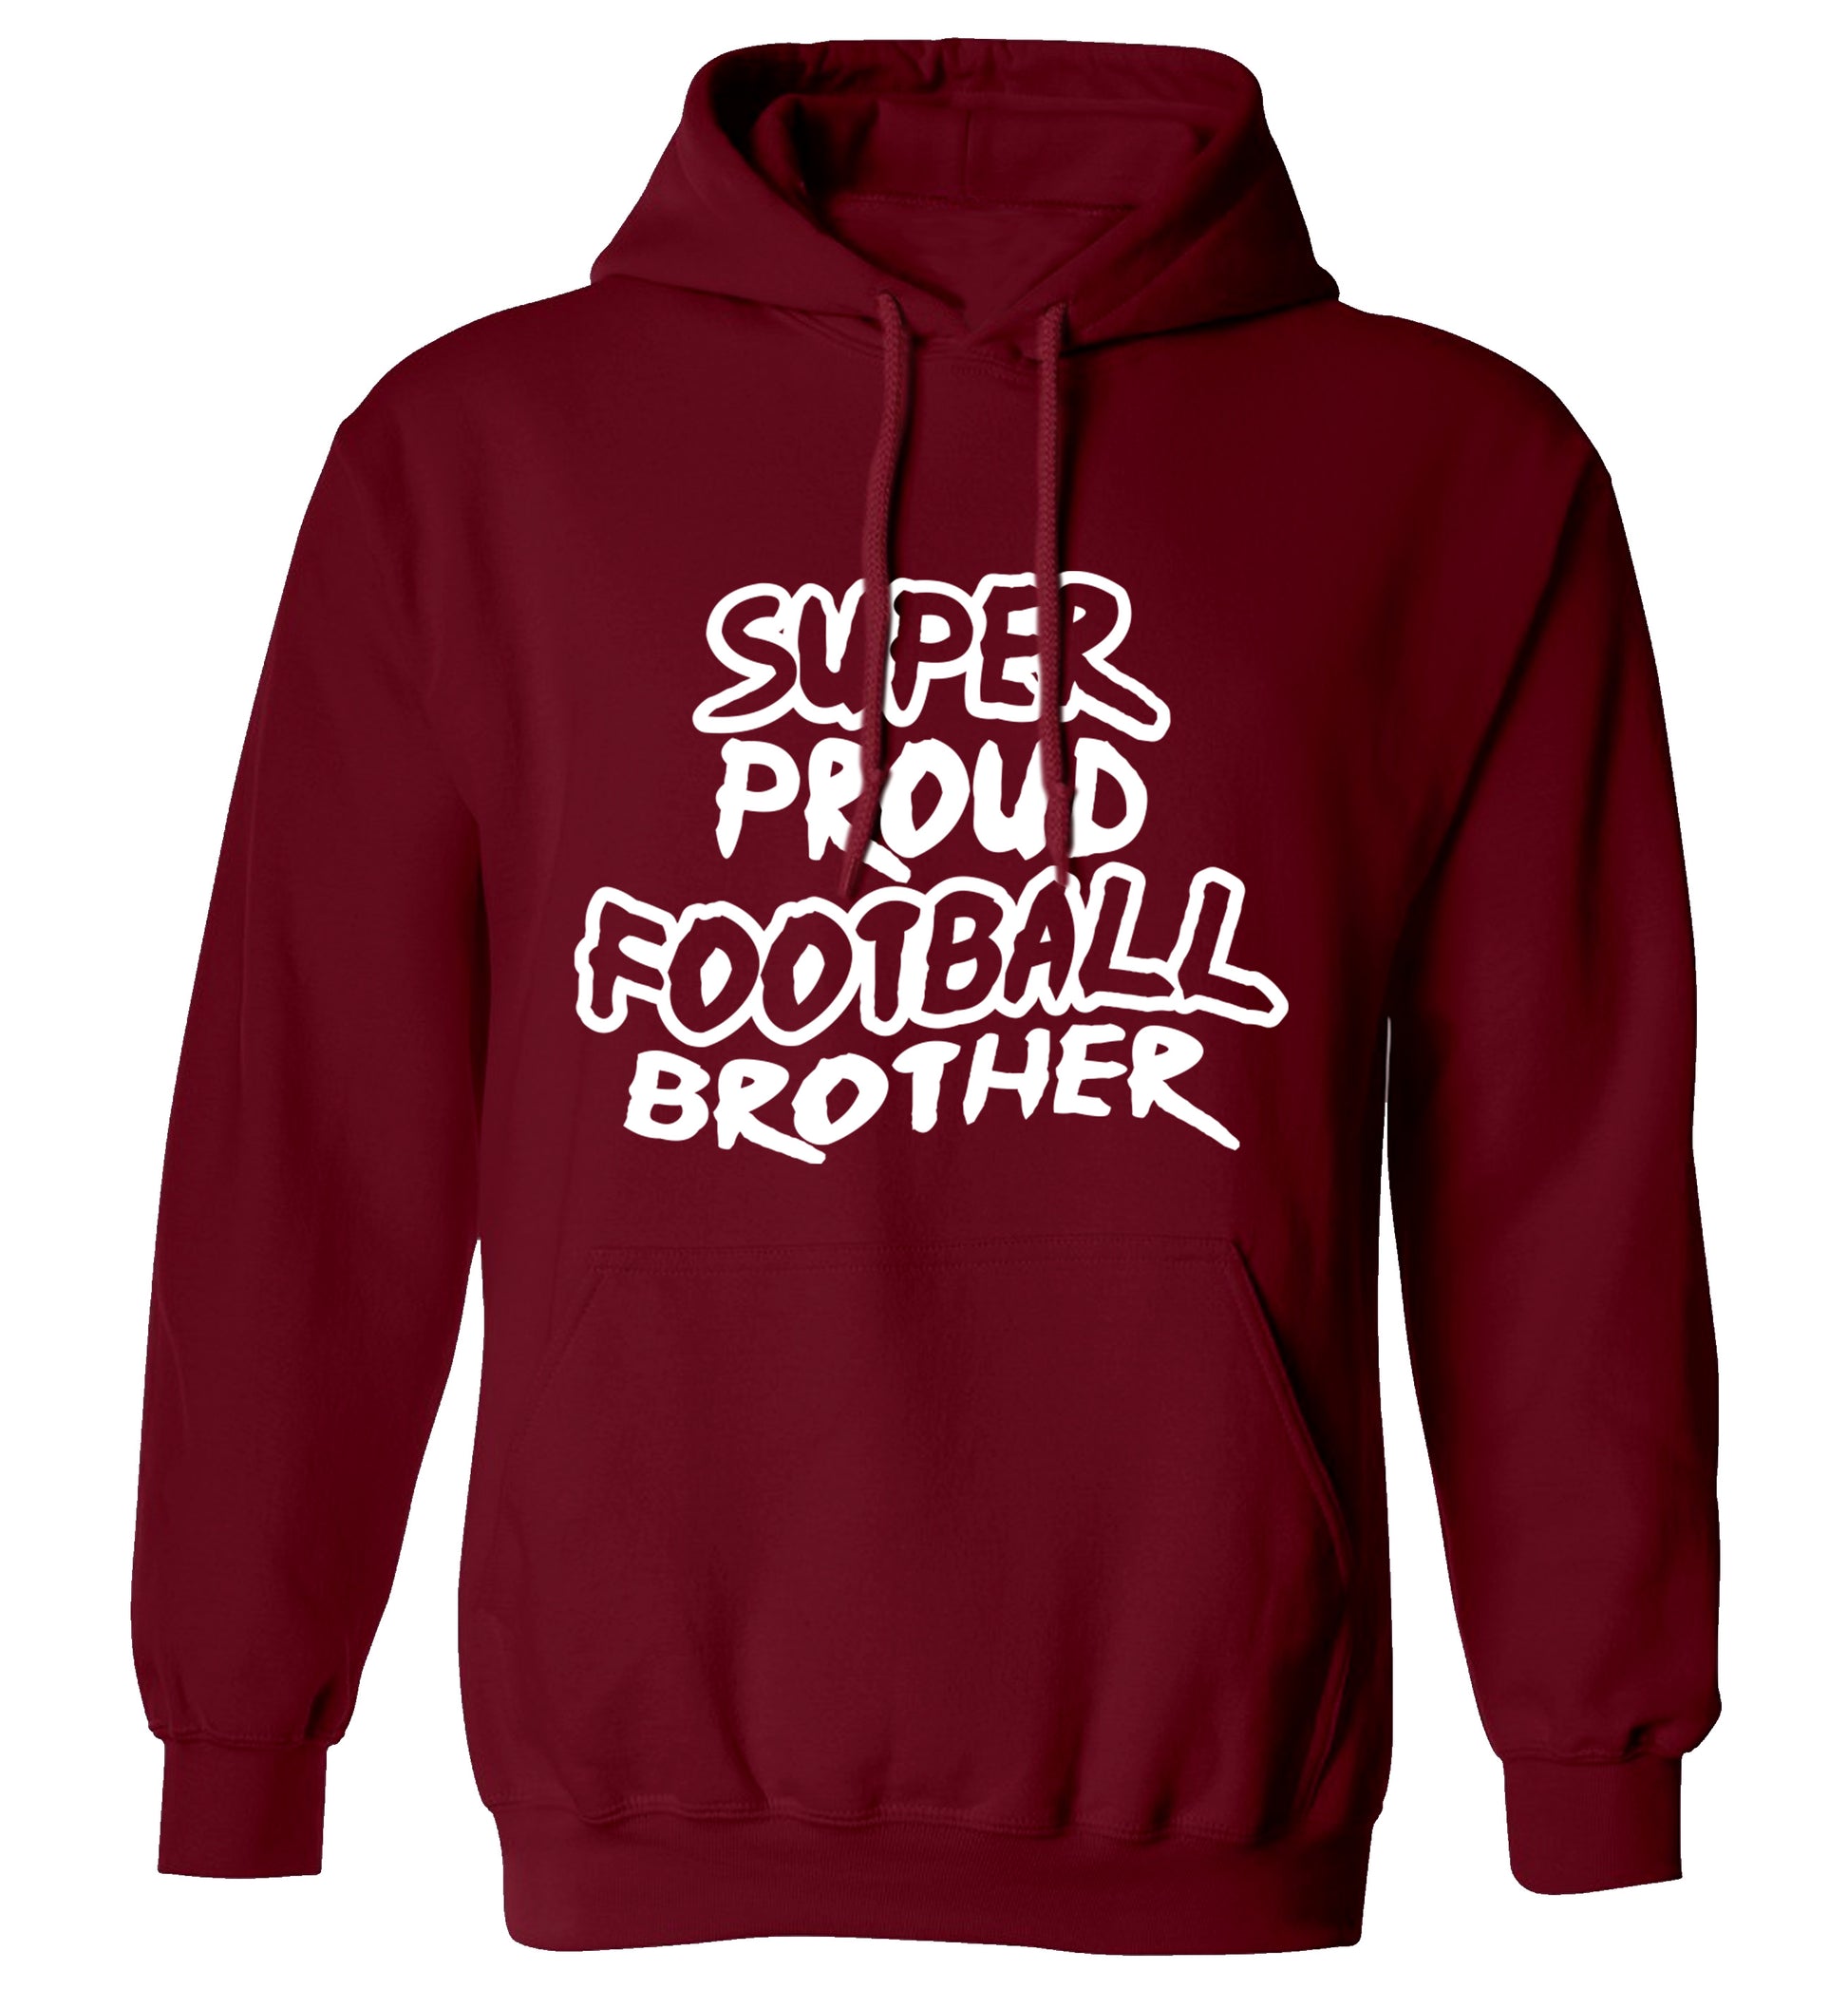 Super proud football brother adults unisexmaroon hoodie 2XL